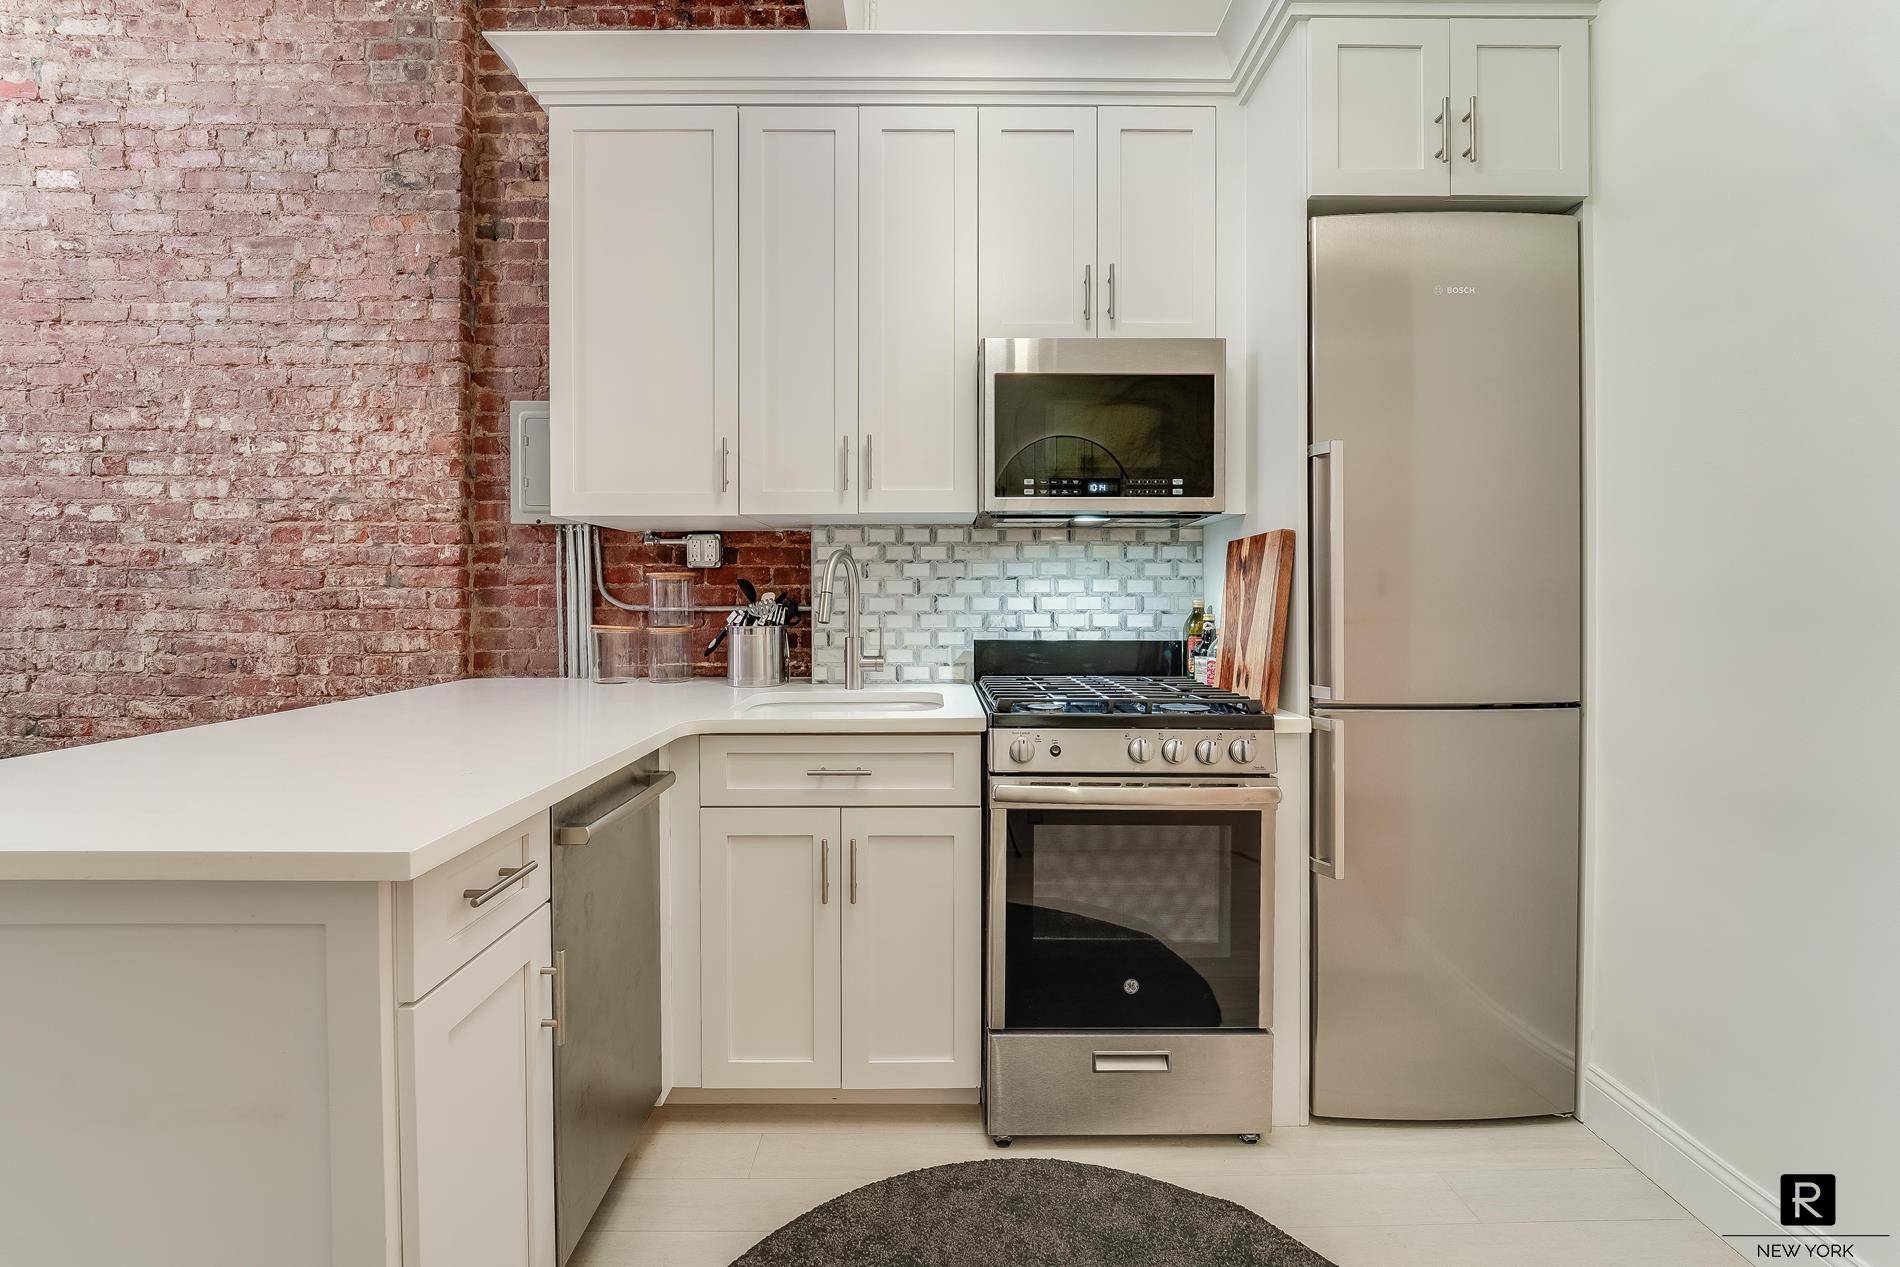 Beautiful and charming co op unit for sale in a historic tenement building, built before the turn of the century.